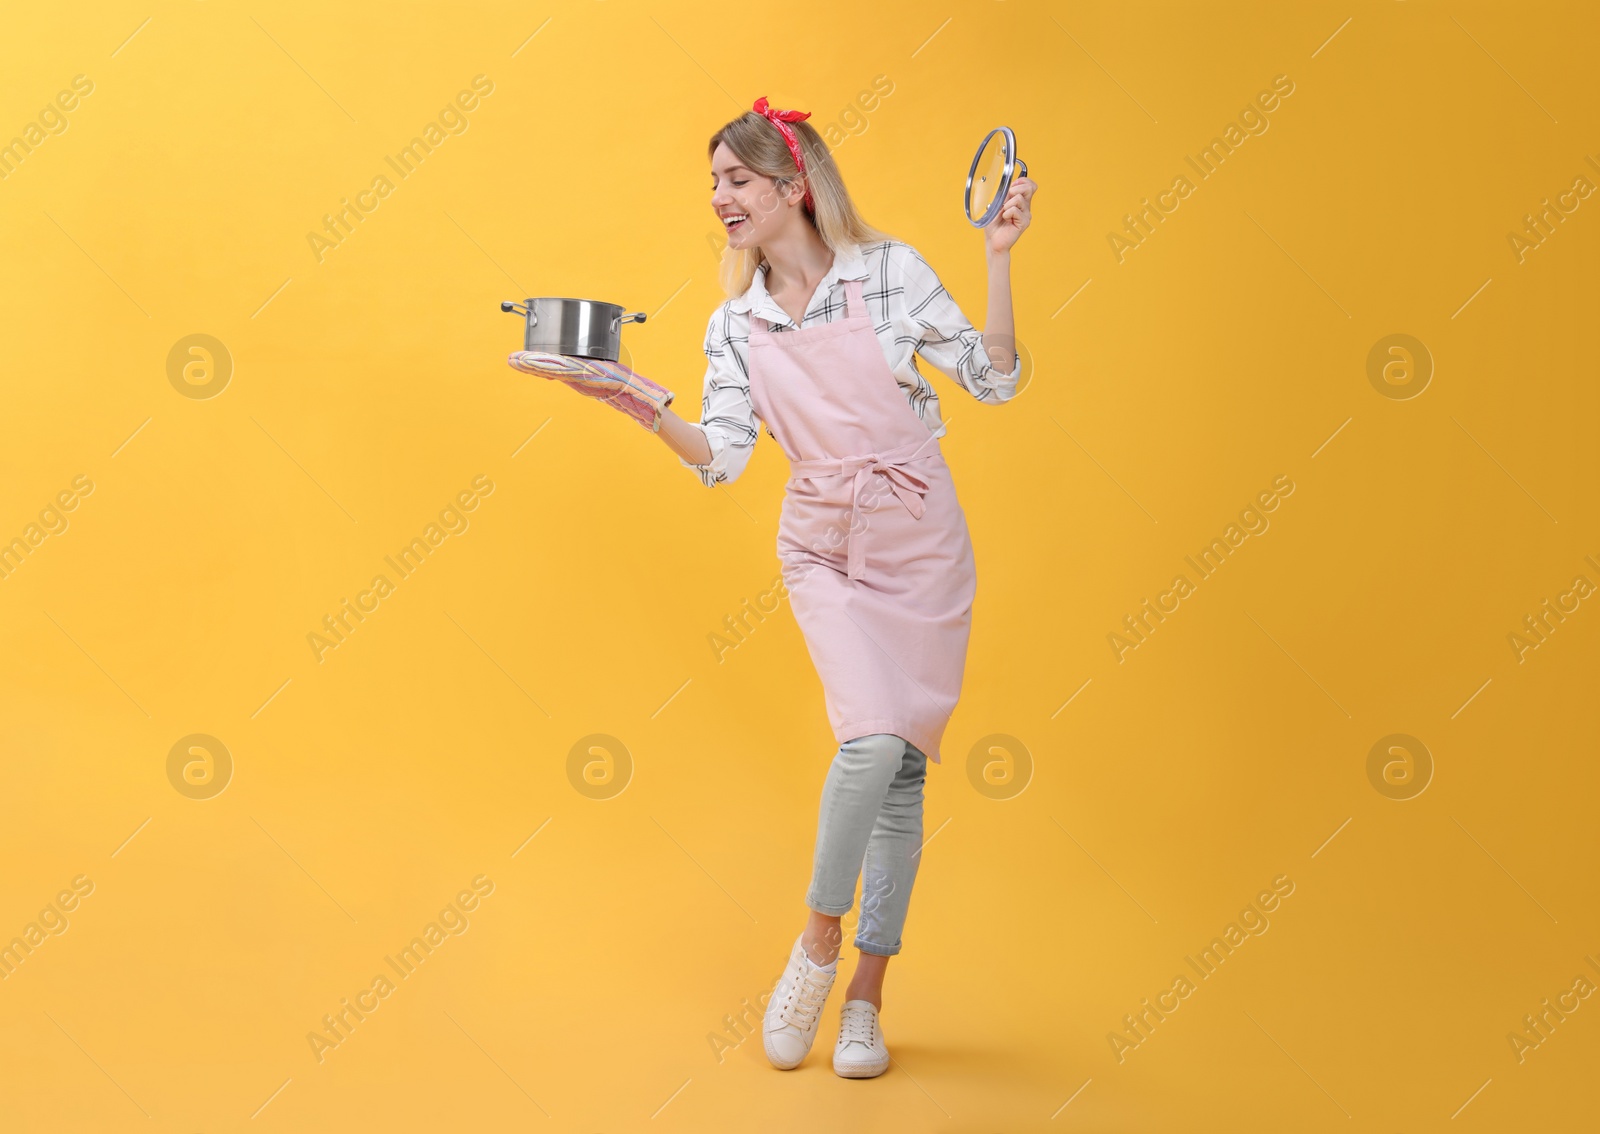 Photo of Young housewife with pot on yellow background